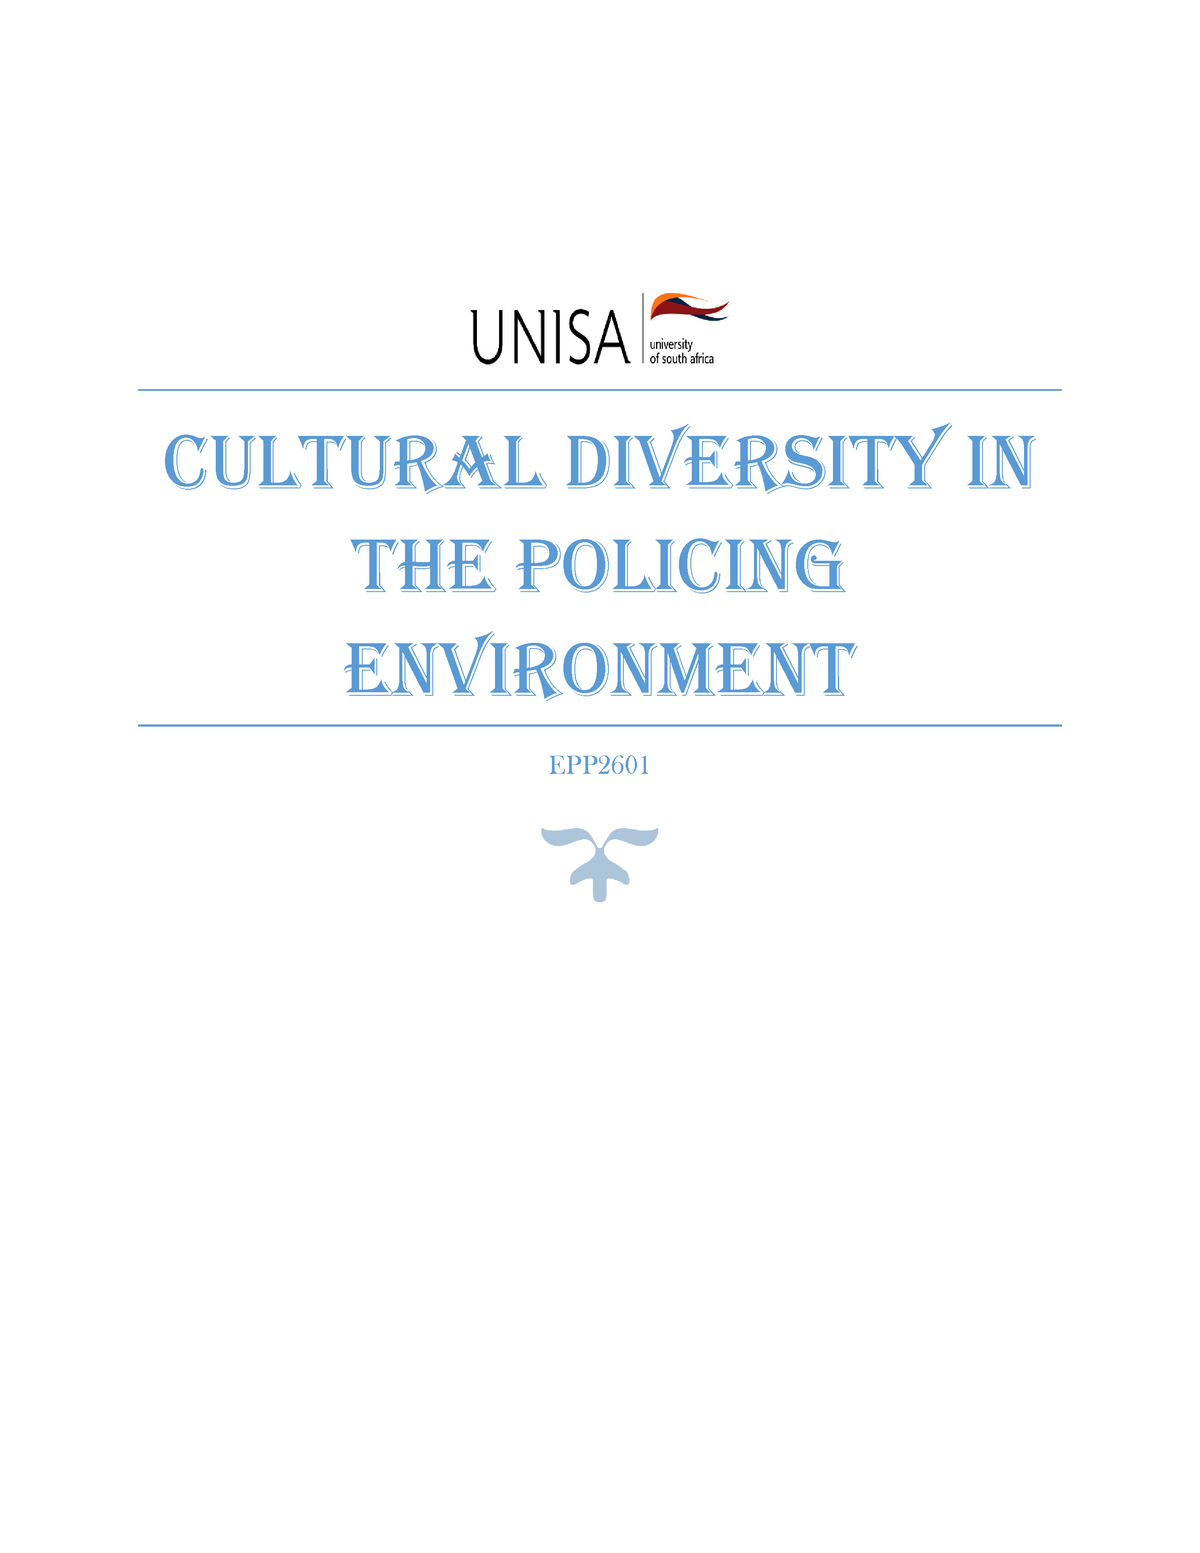 essay on cultural diversity in the policing environment